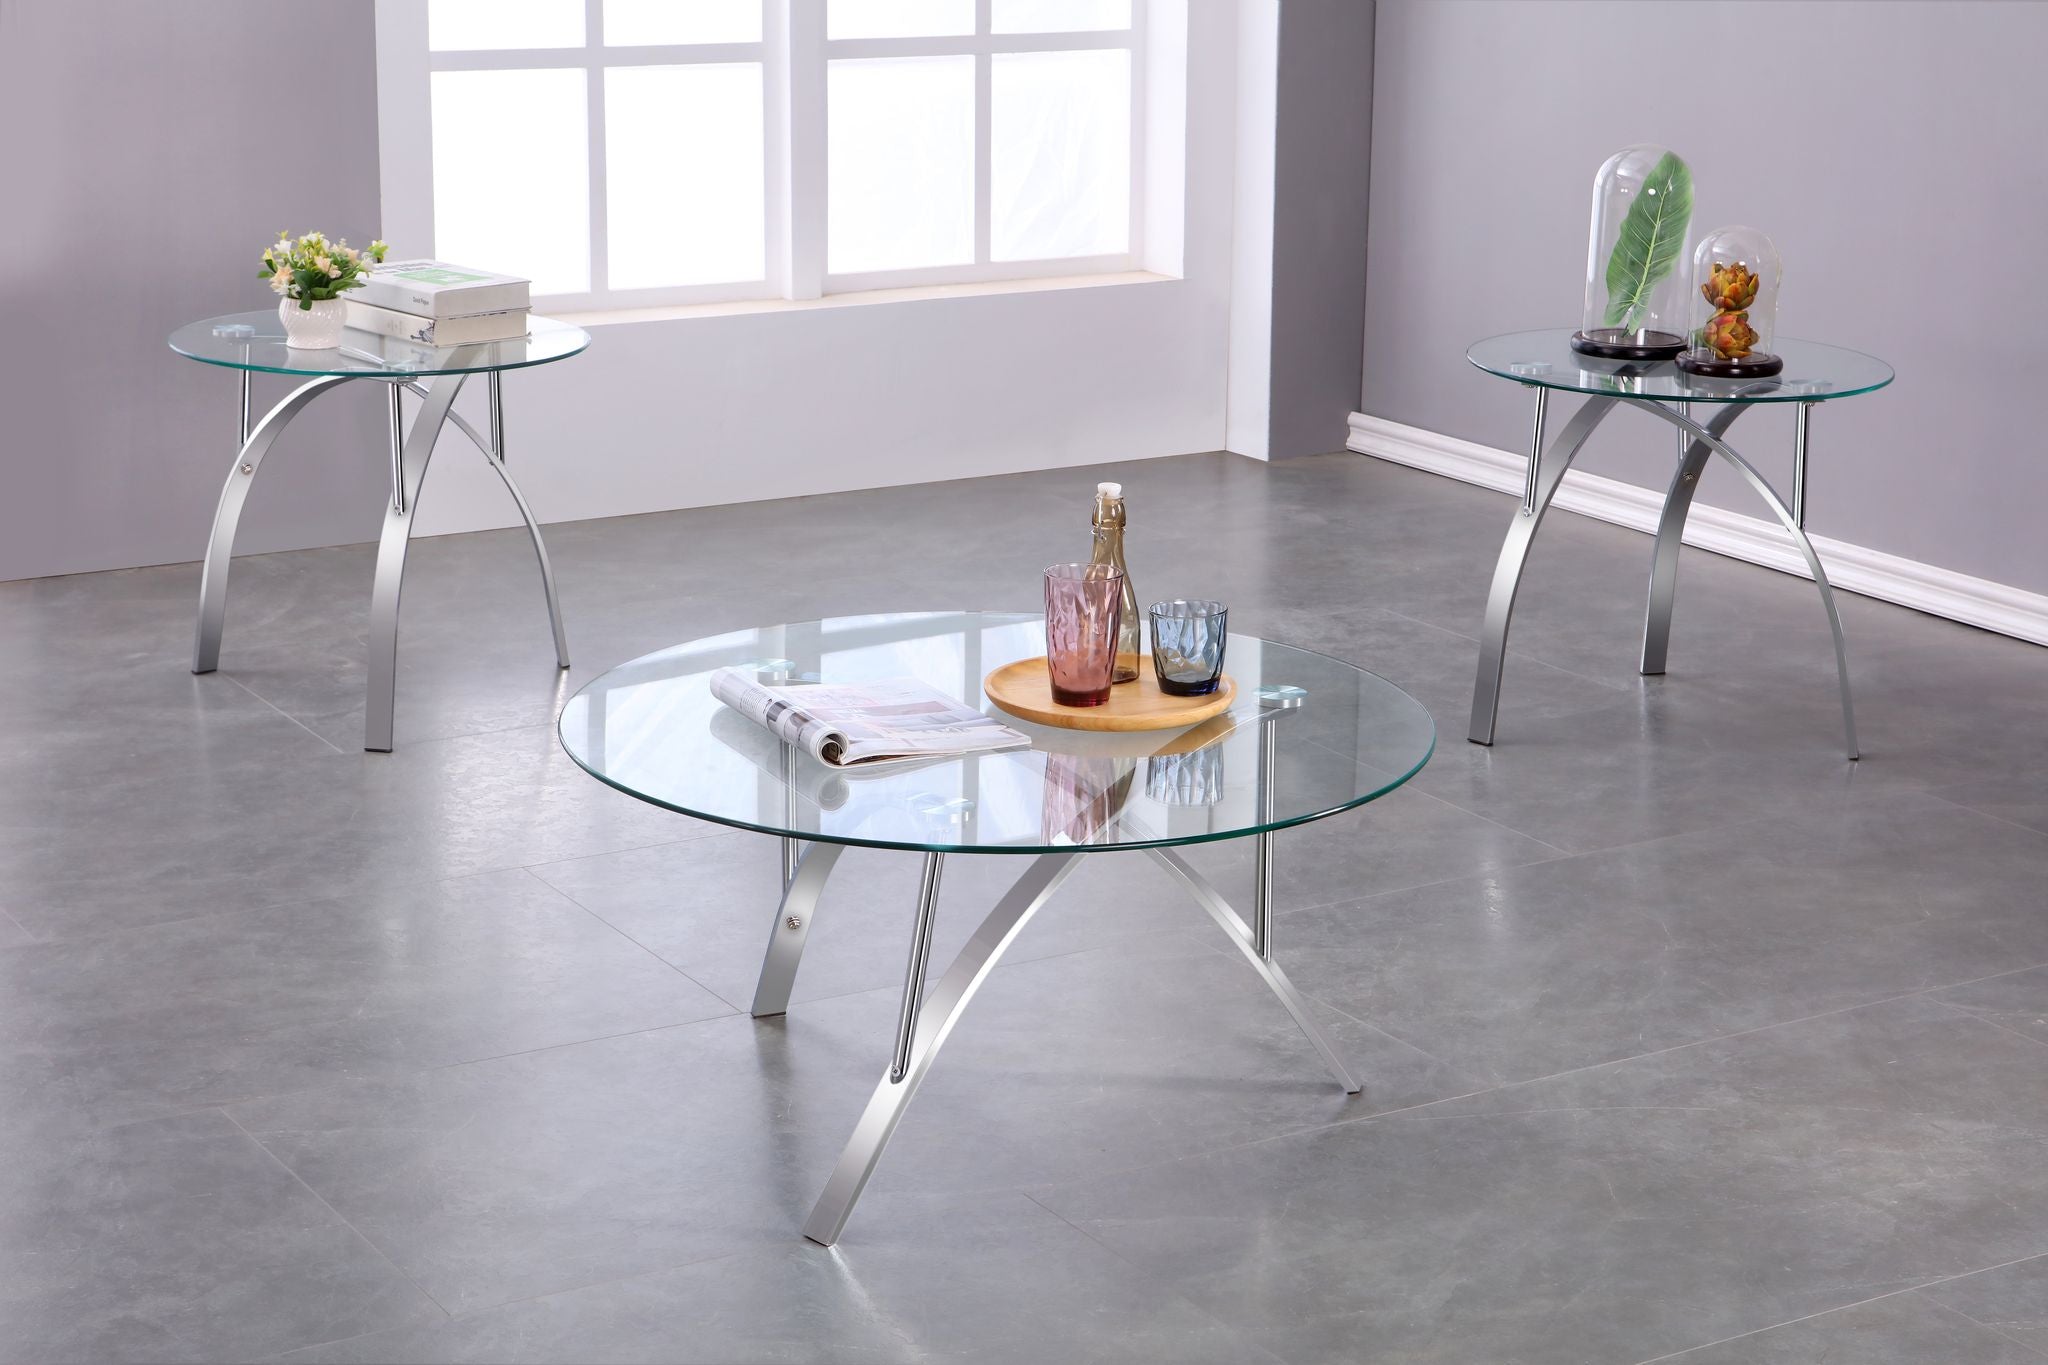 3Pc Coffee Table Set Silver 1019-13